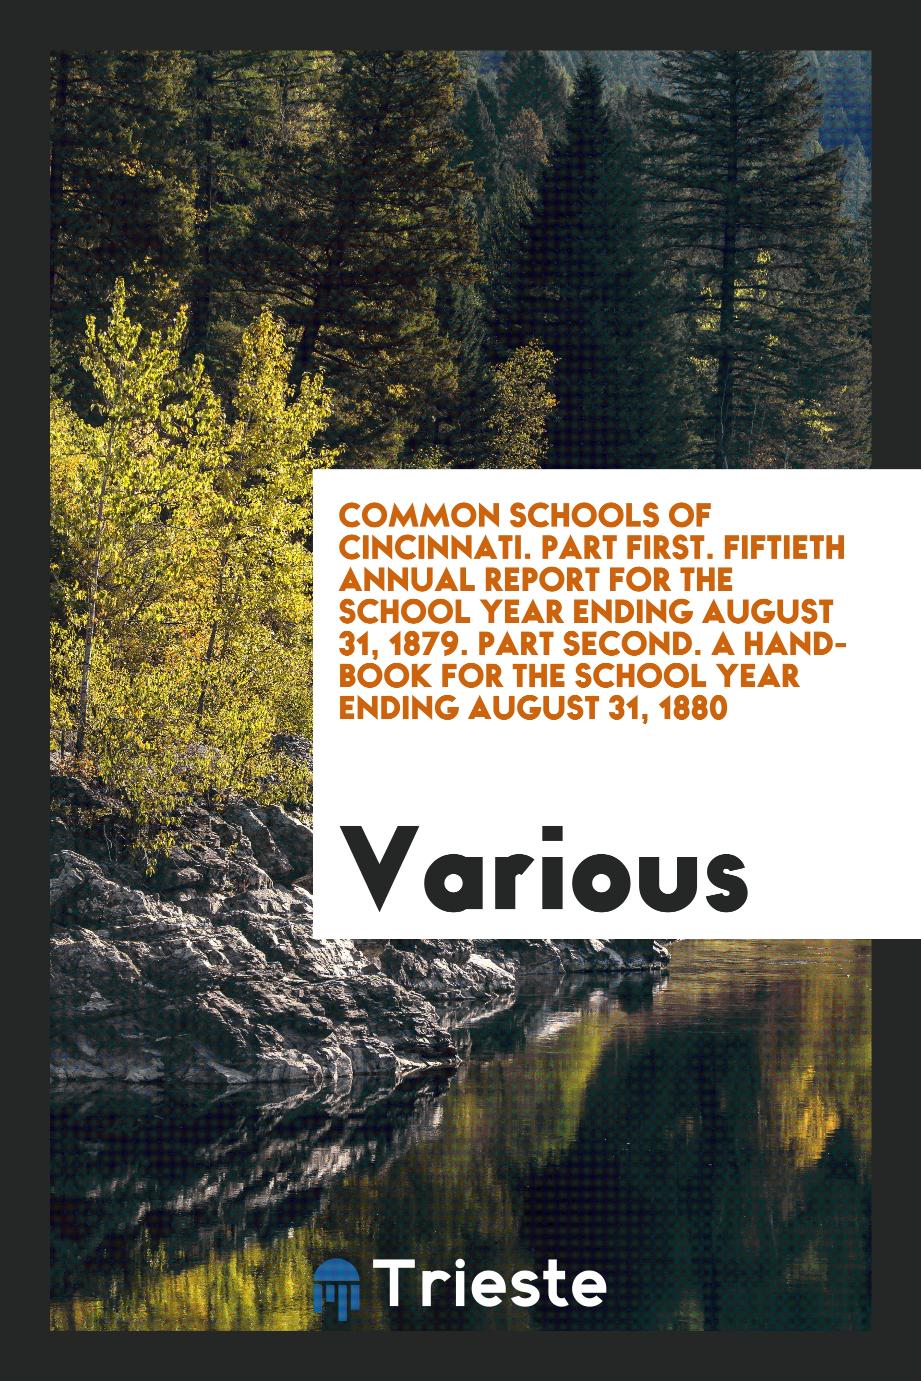 Common Schools of Cincinnati. Part First. Fiftieth Annual Report for the School Year Ending August 31, 1879. Part Second. A Hand-Book for the School Year Ending August 31, 1880